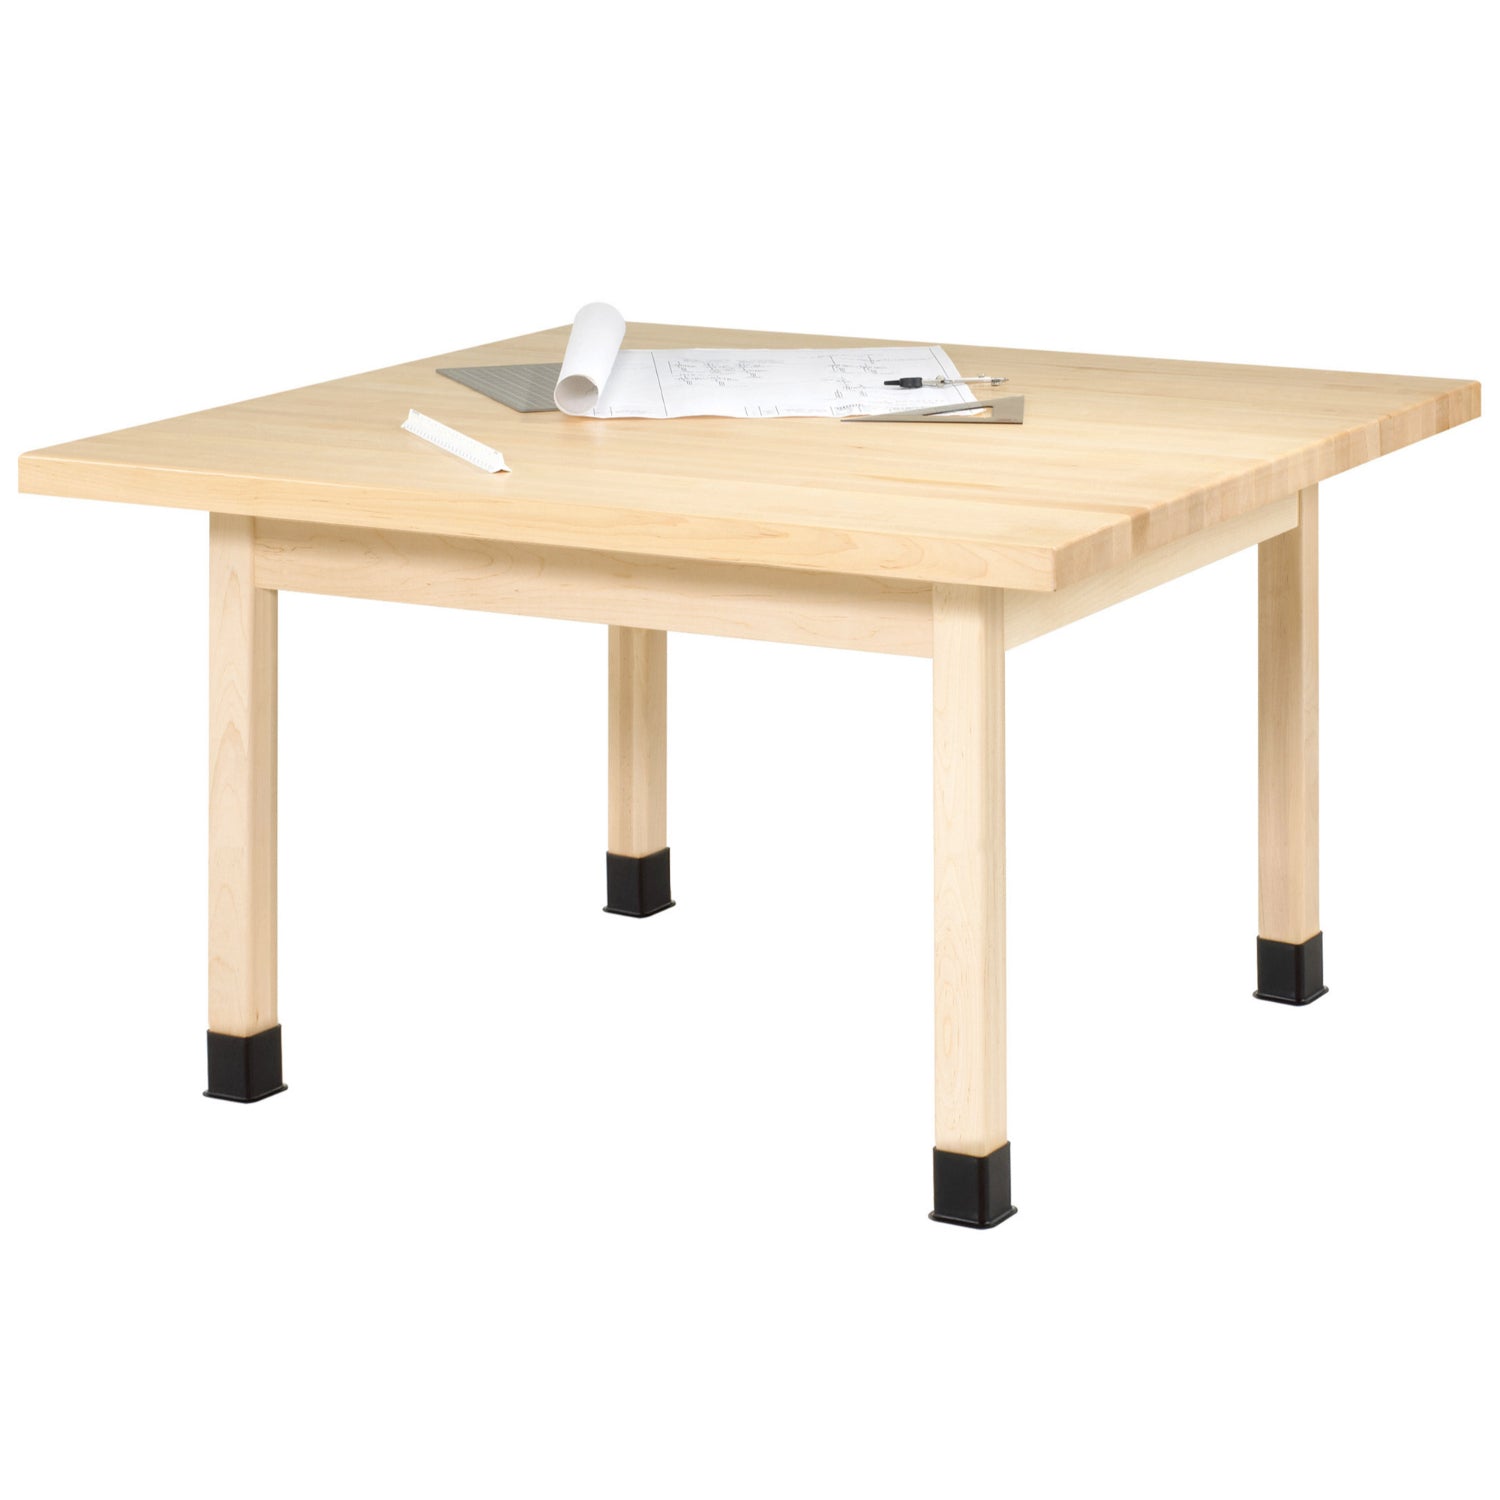 The Worktop Classic Elementary Height Four-Station Table, 26" H